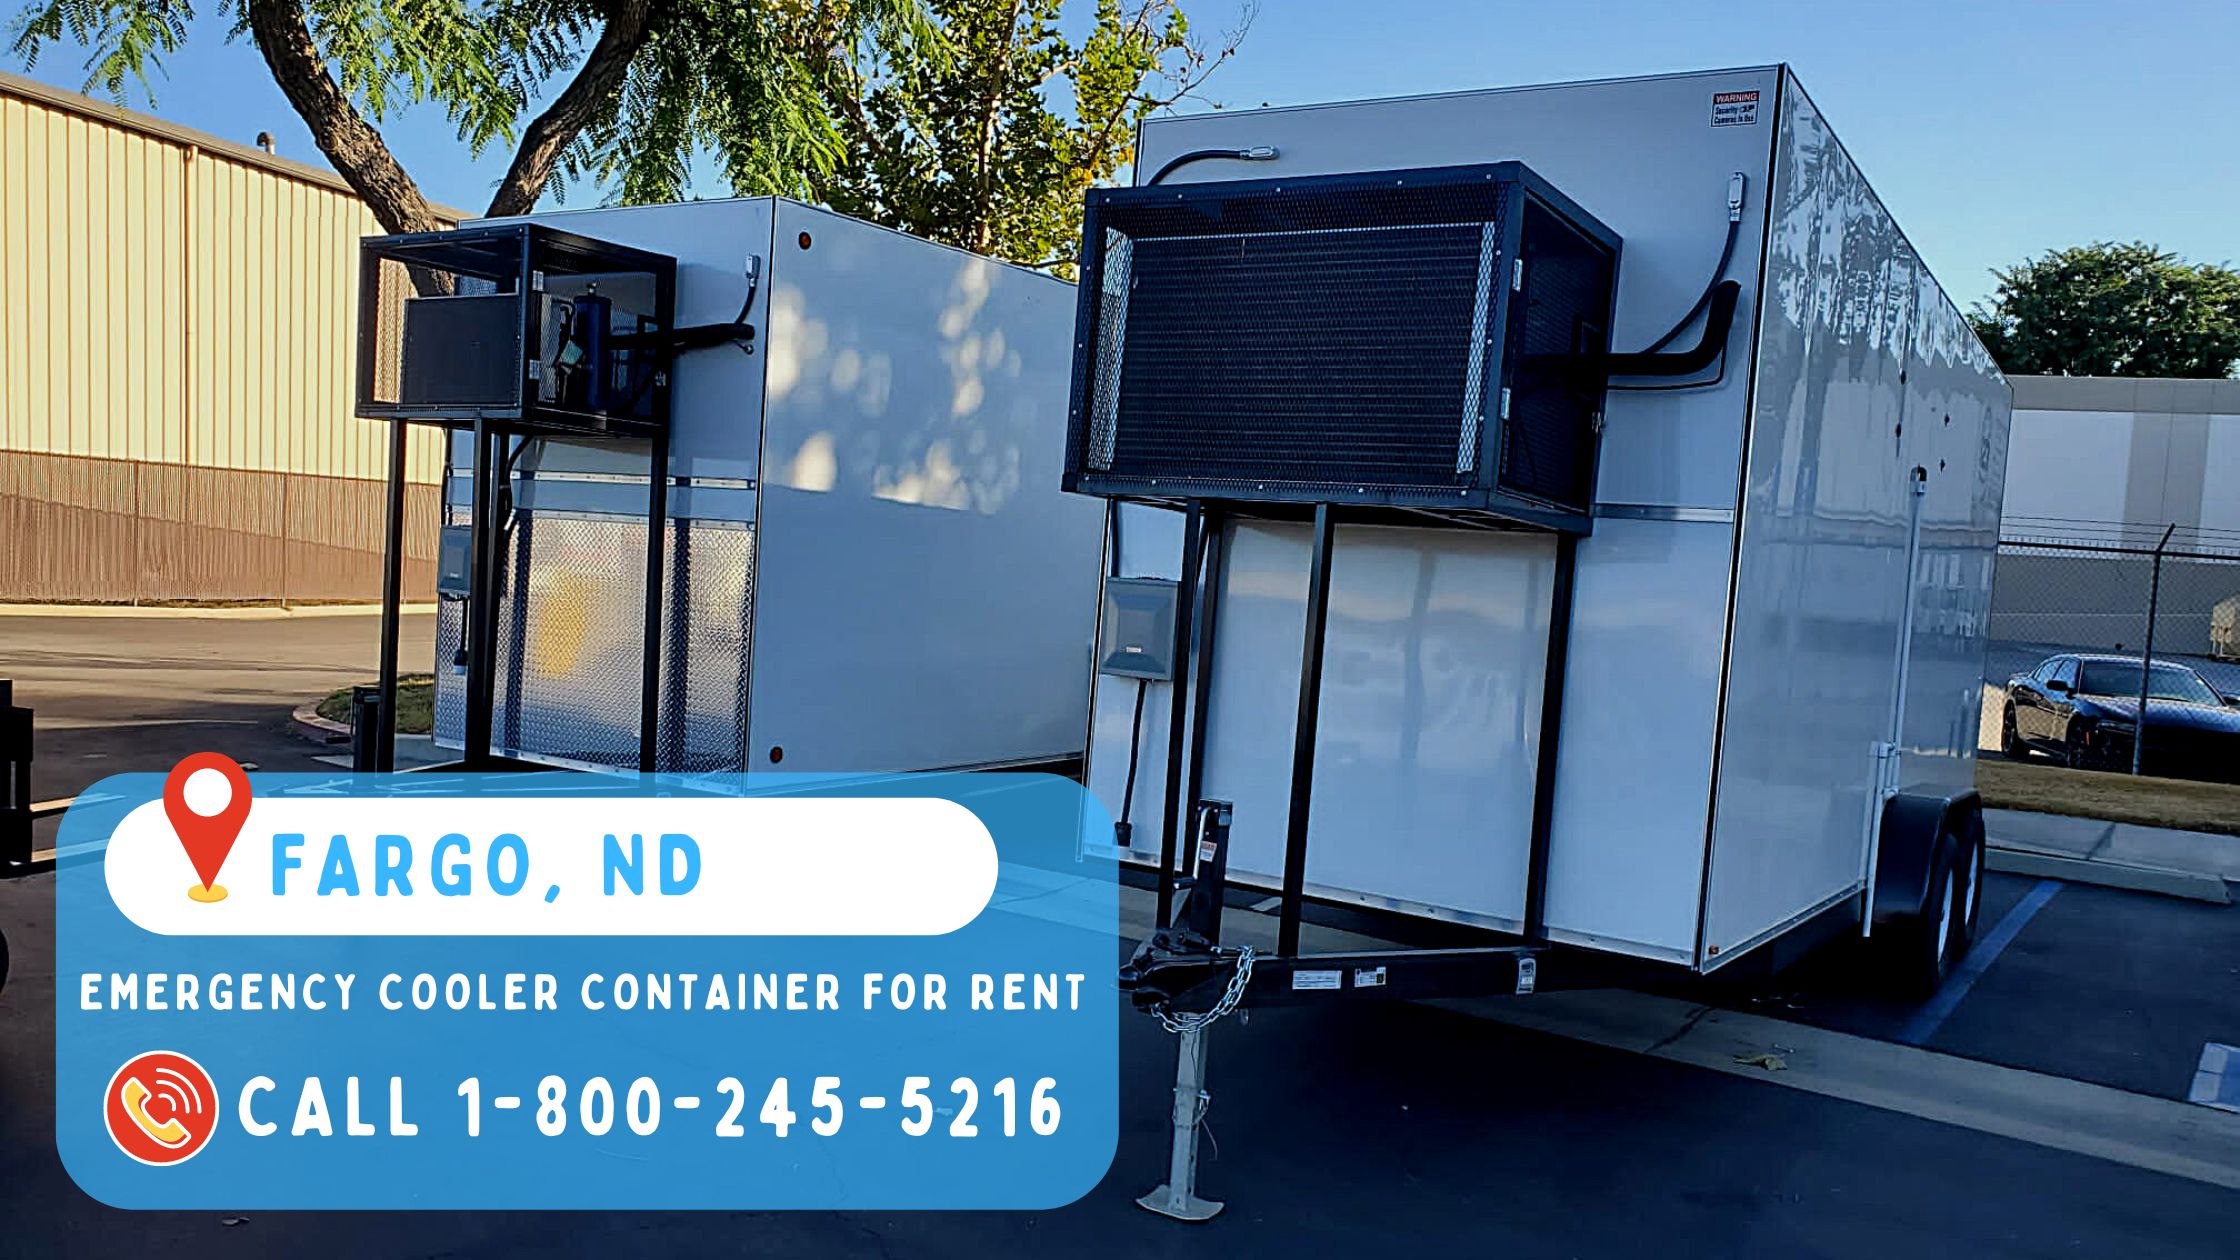 Emergency Cooler Container for Rent in Fargo